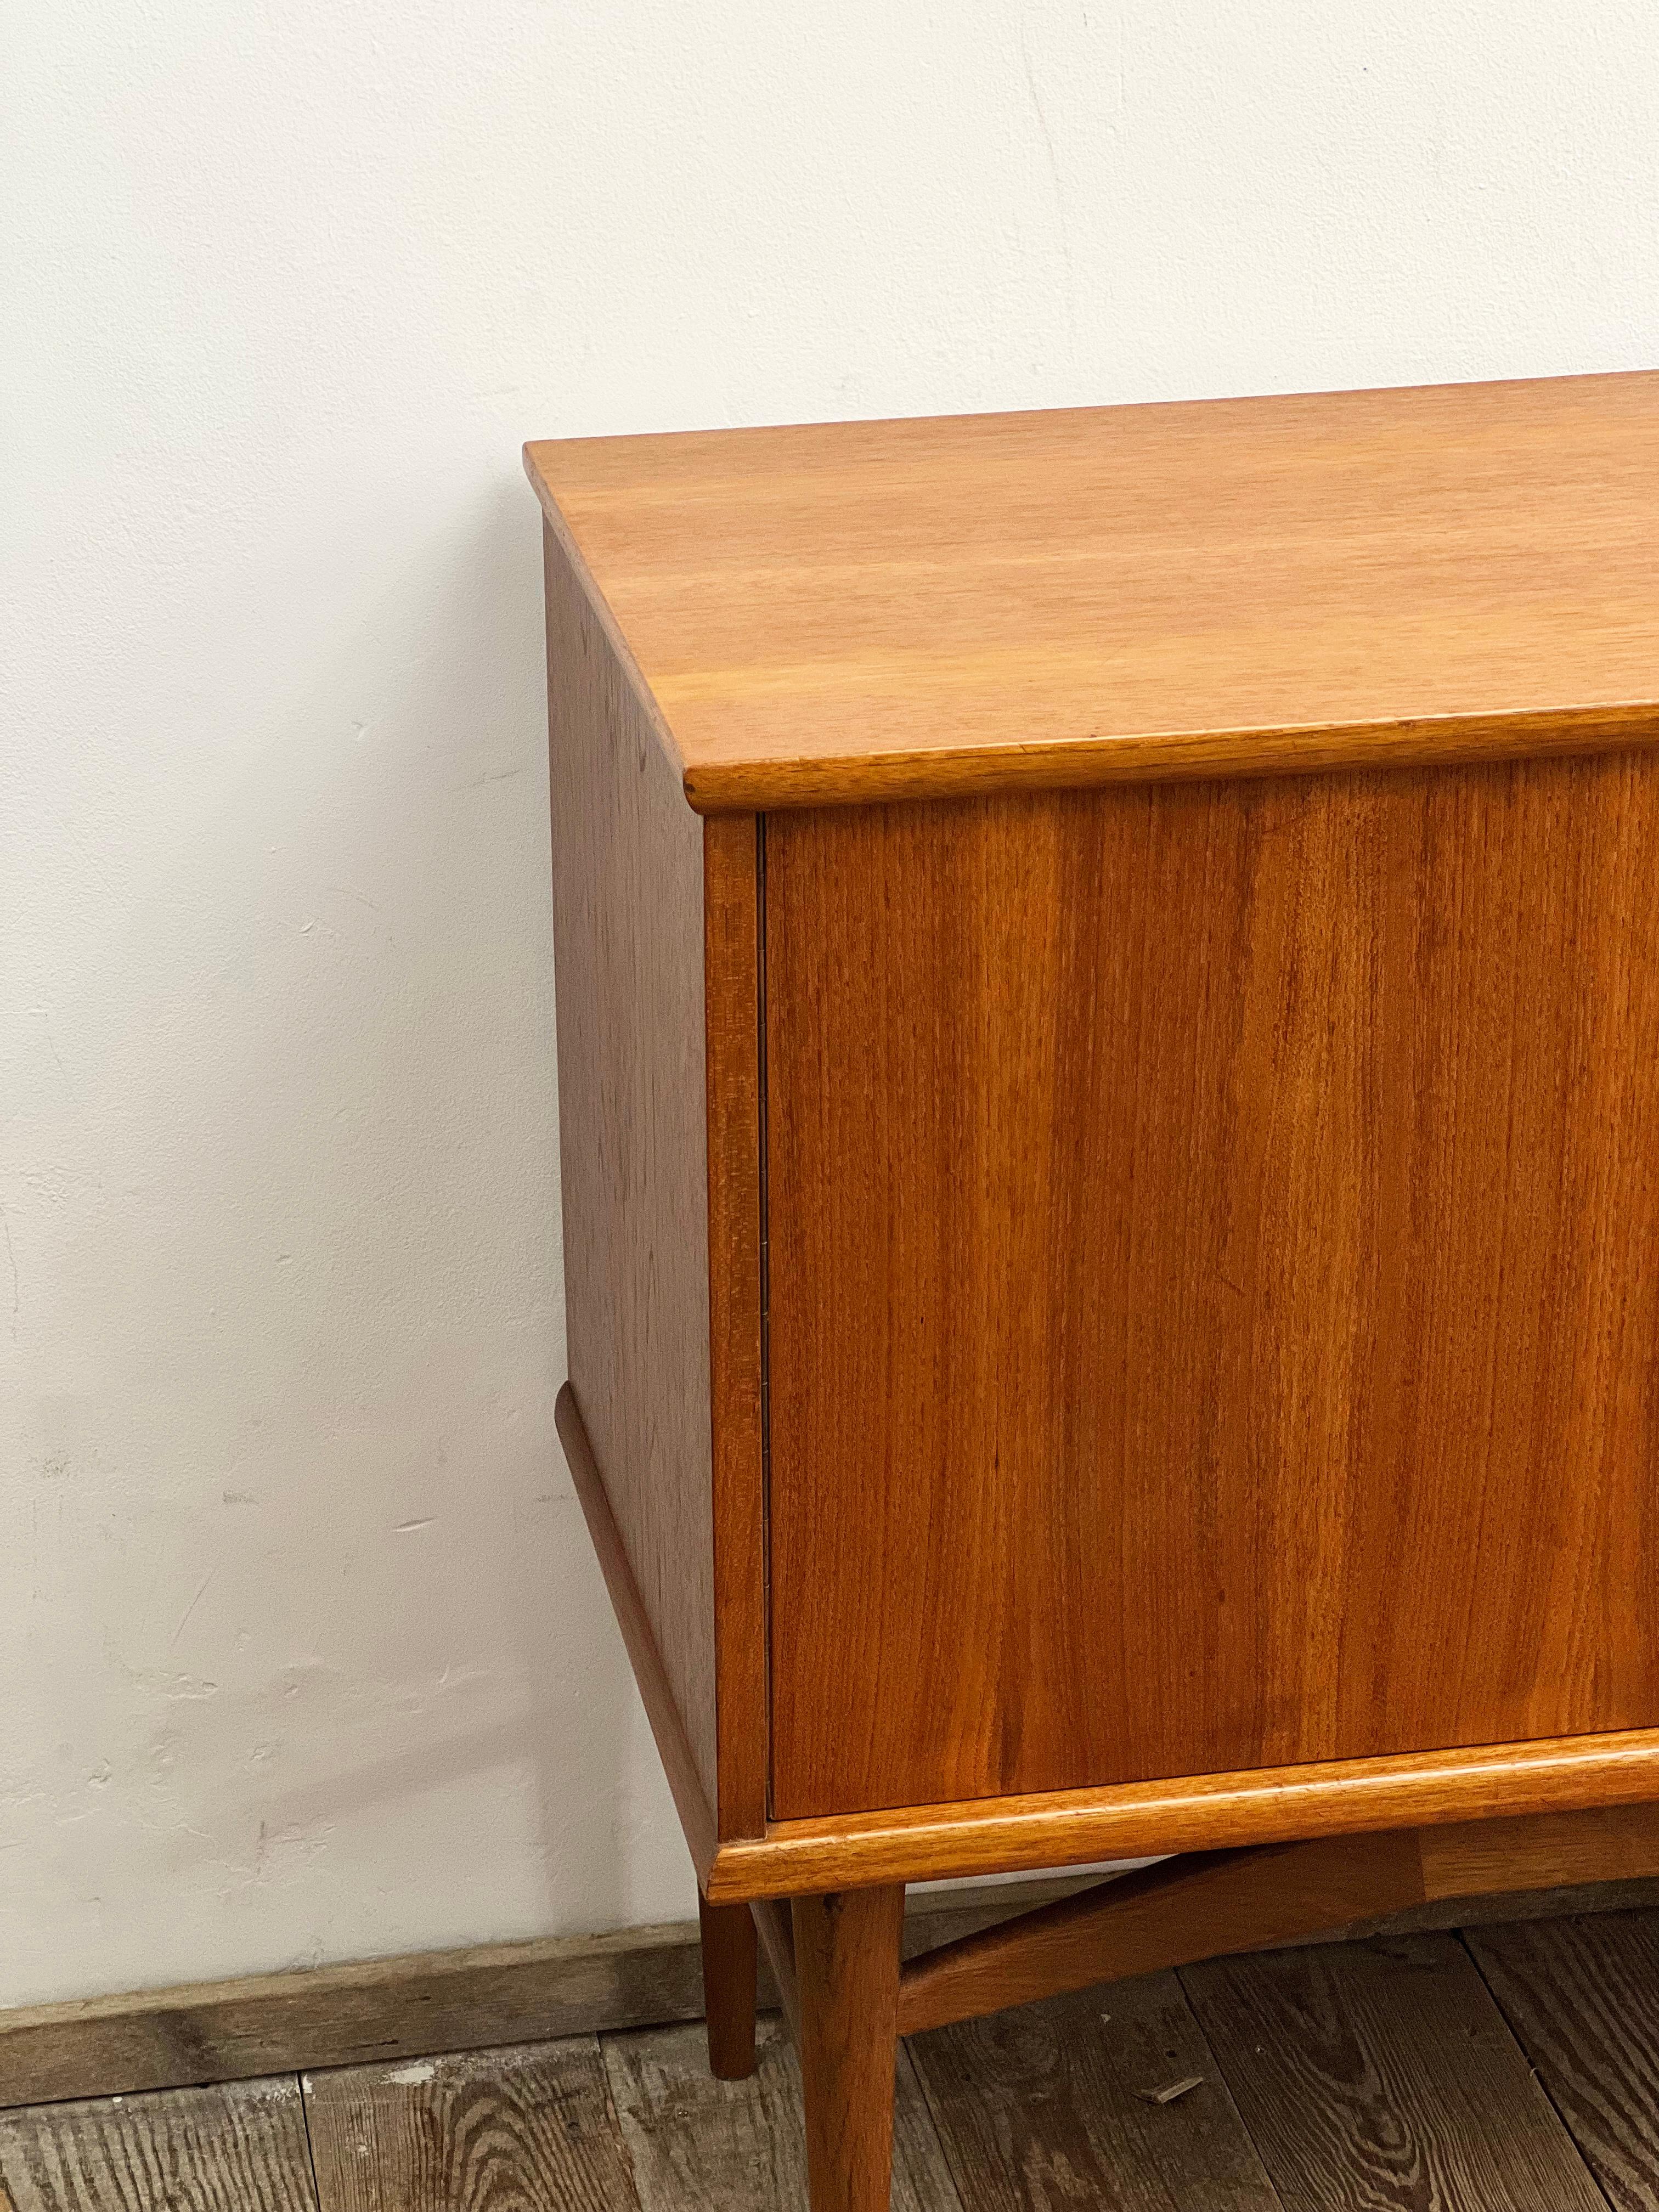 Small Mid-Century Modern Fredericia Sideboard in Teak, Germany, 1950s For Sale 1